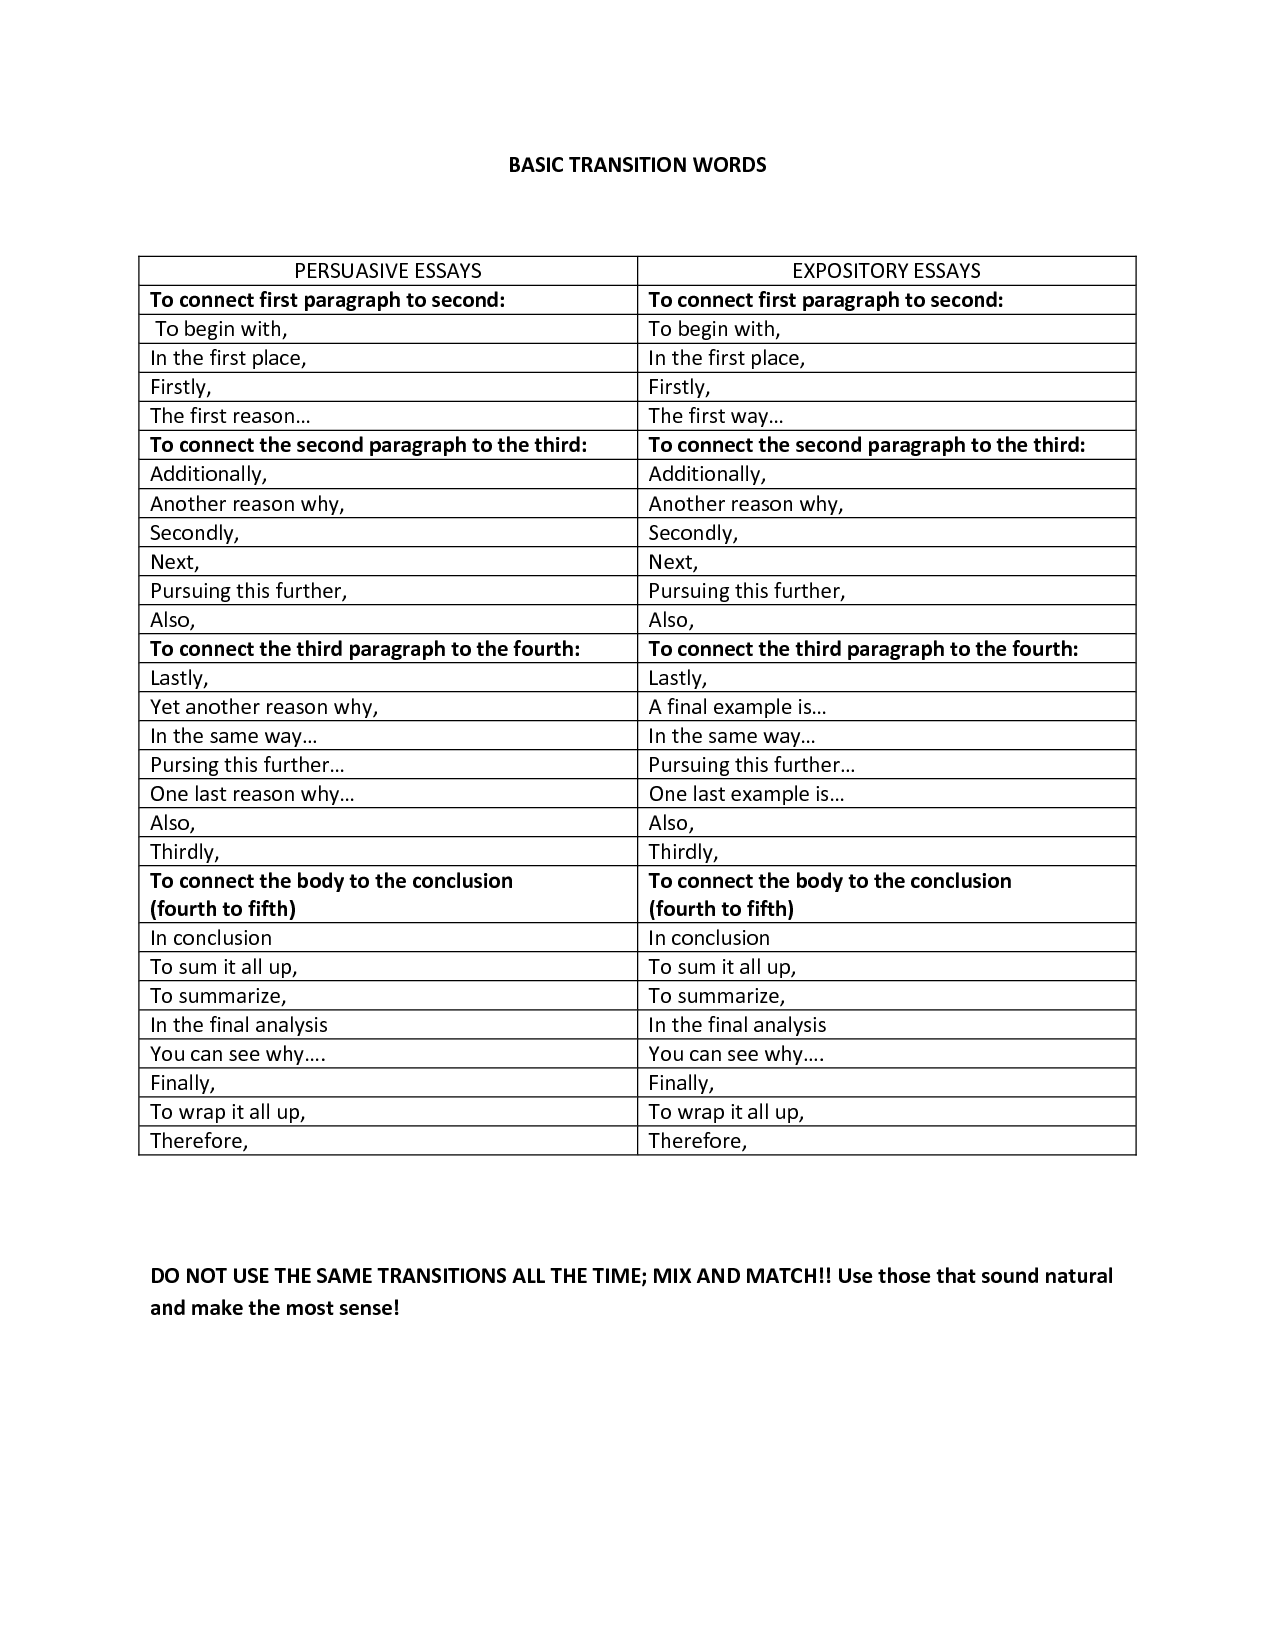 Important Transition Words for Essays - Usage and Examples